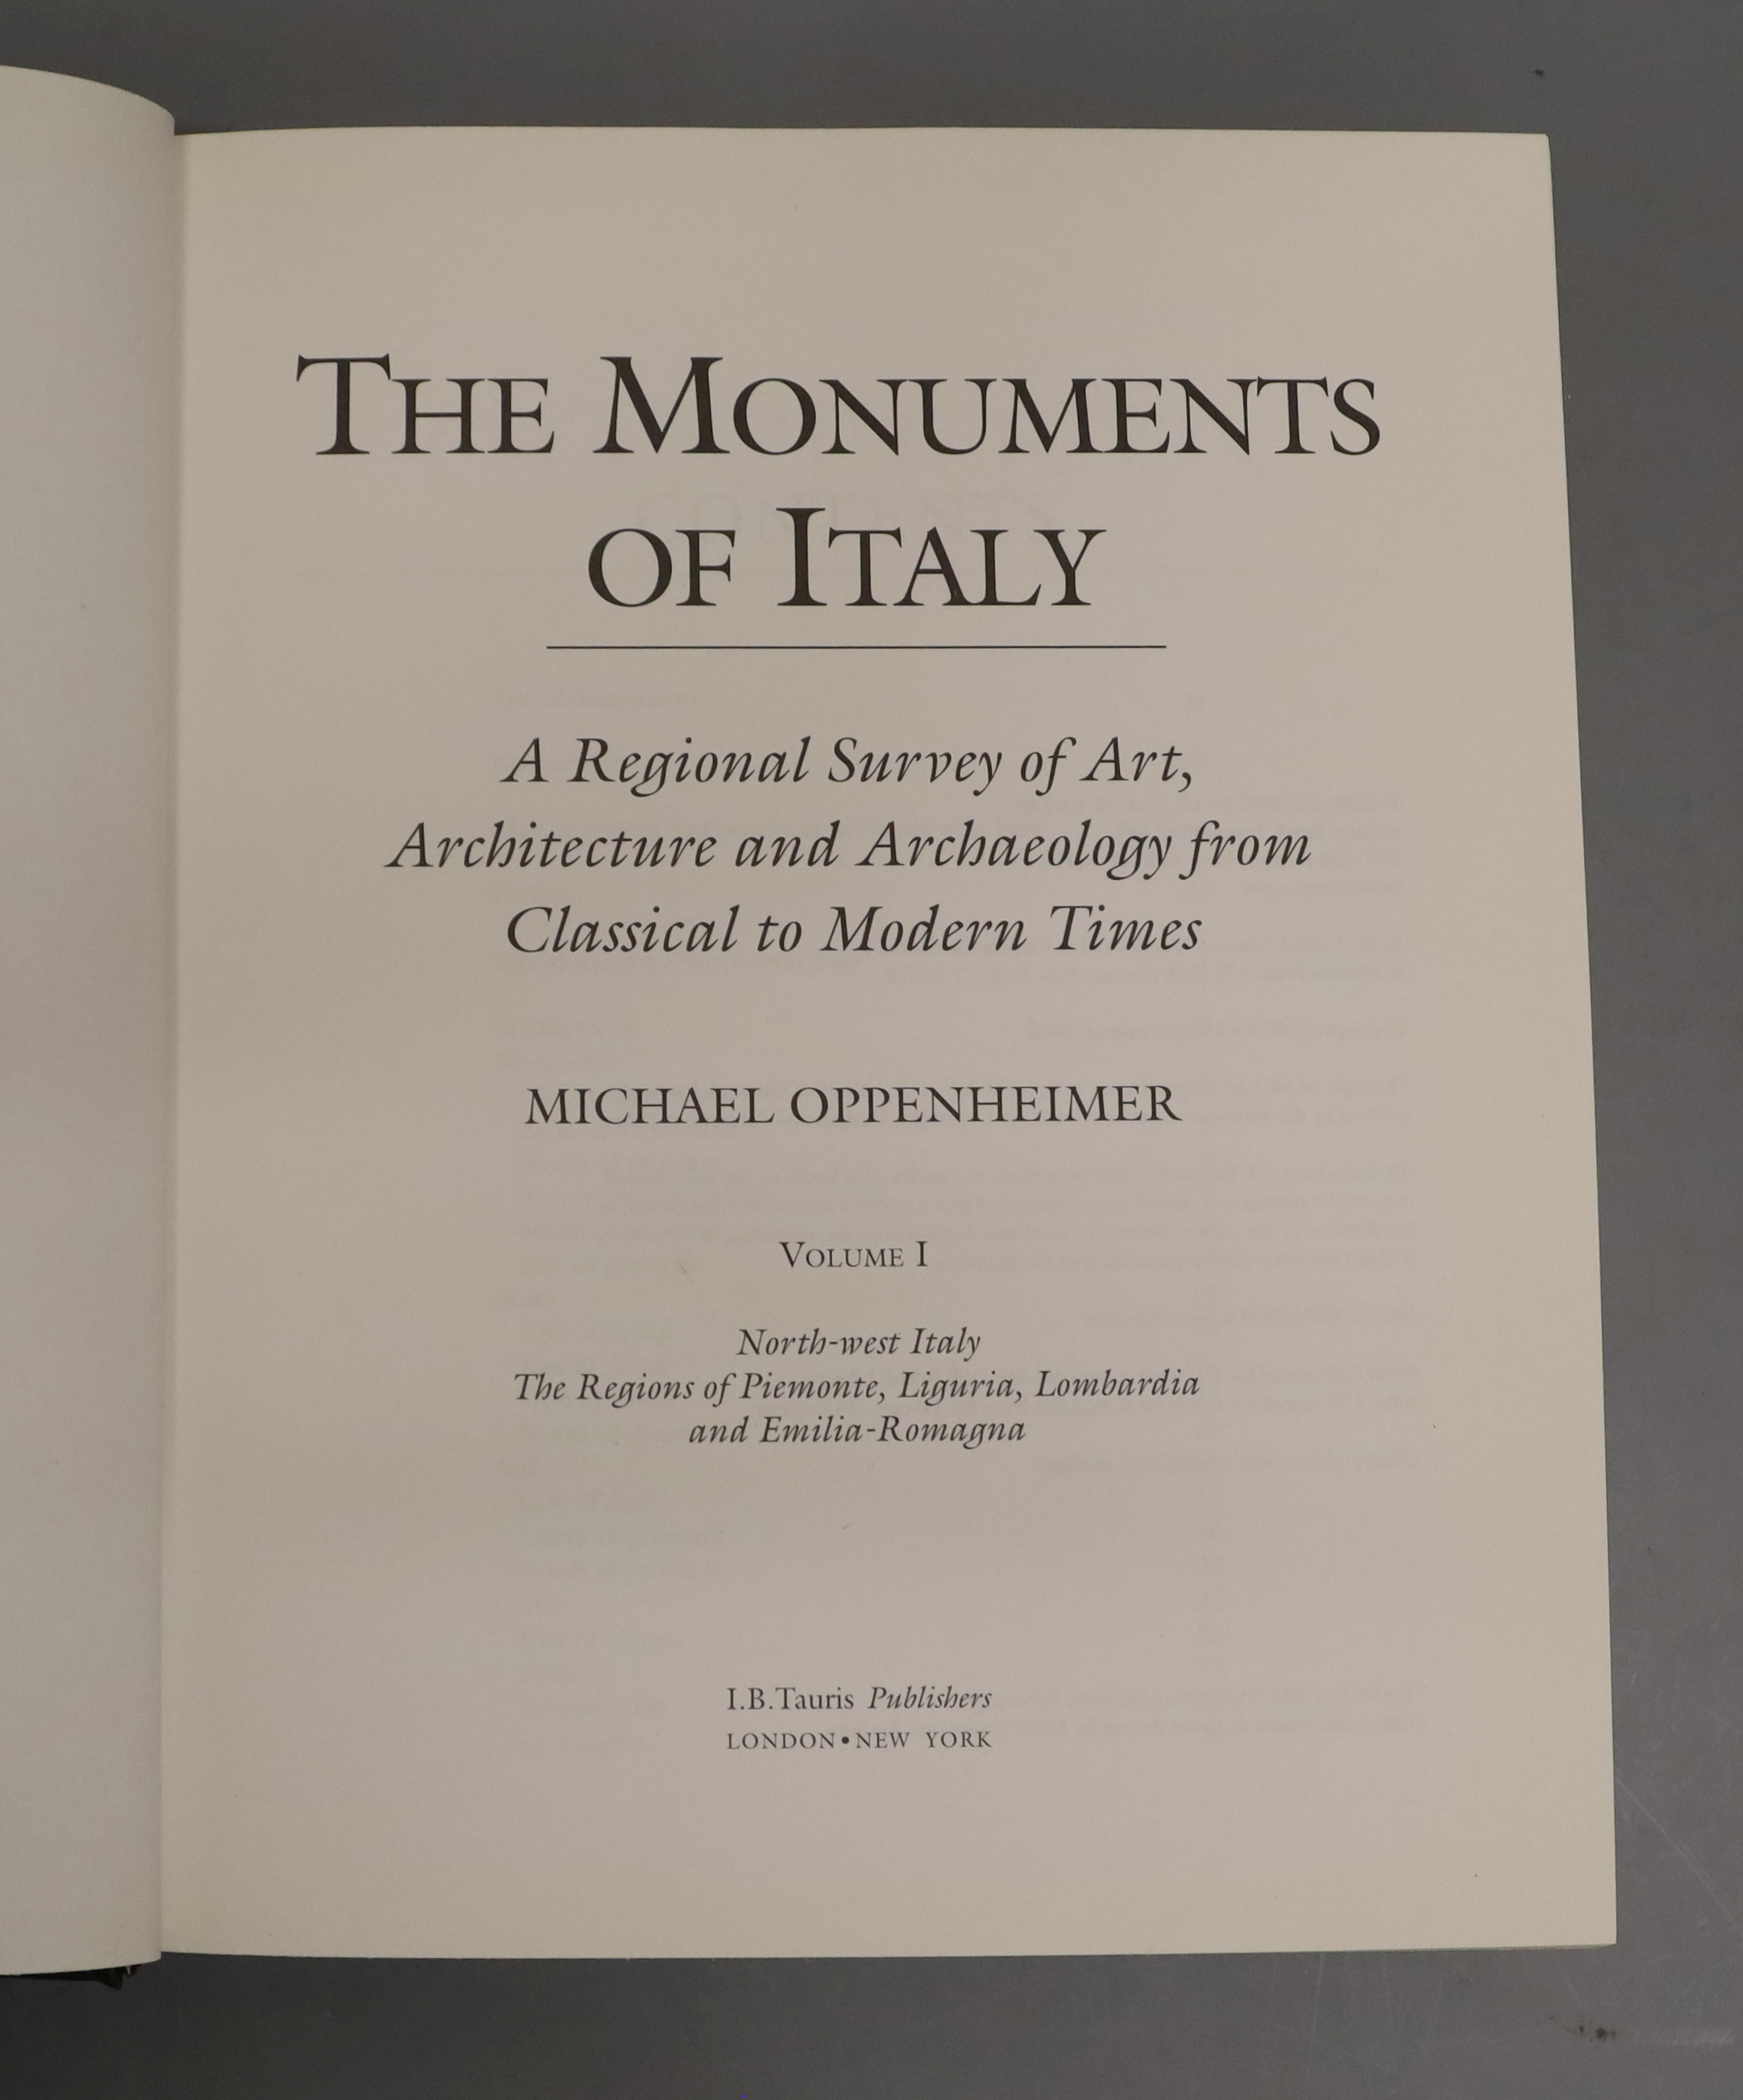 Oppenheimer, Michael - The Monuments of Italy, 6 vols, qto, original black cloth, London and New - Image 2 of 2